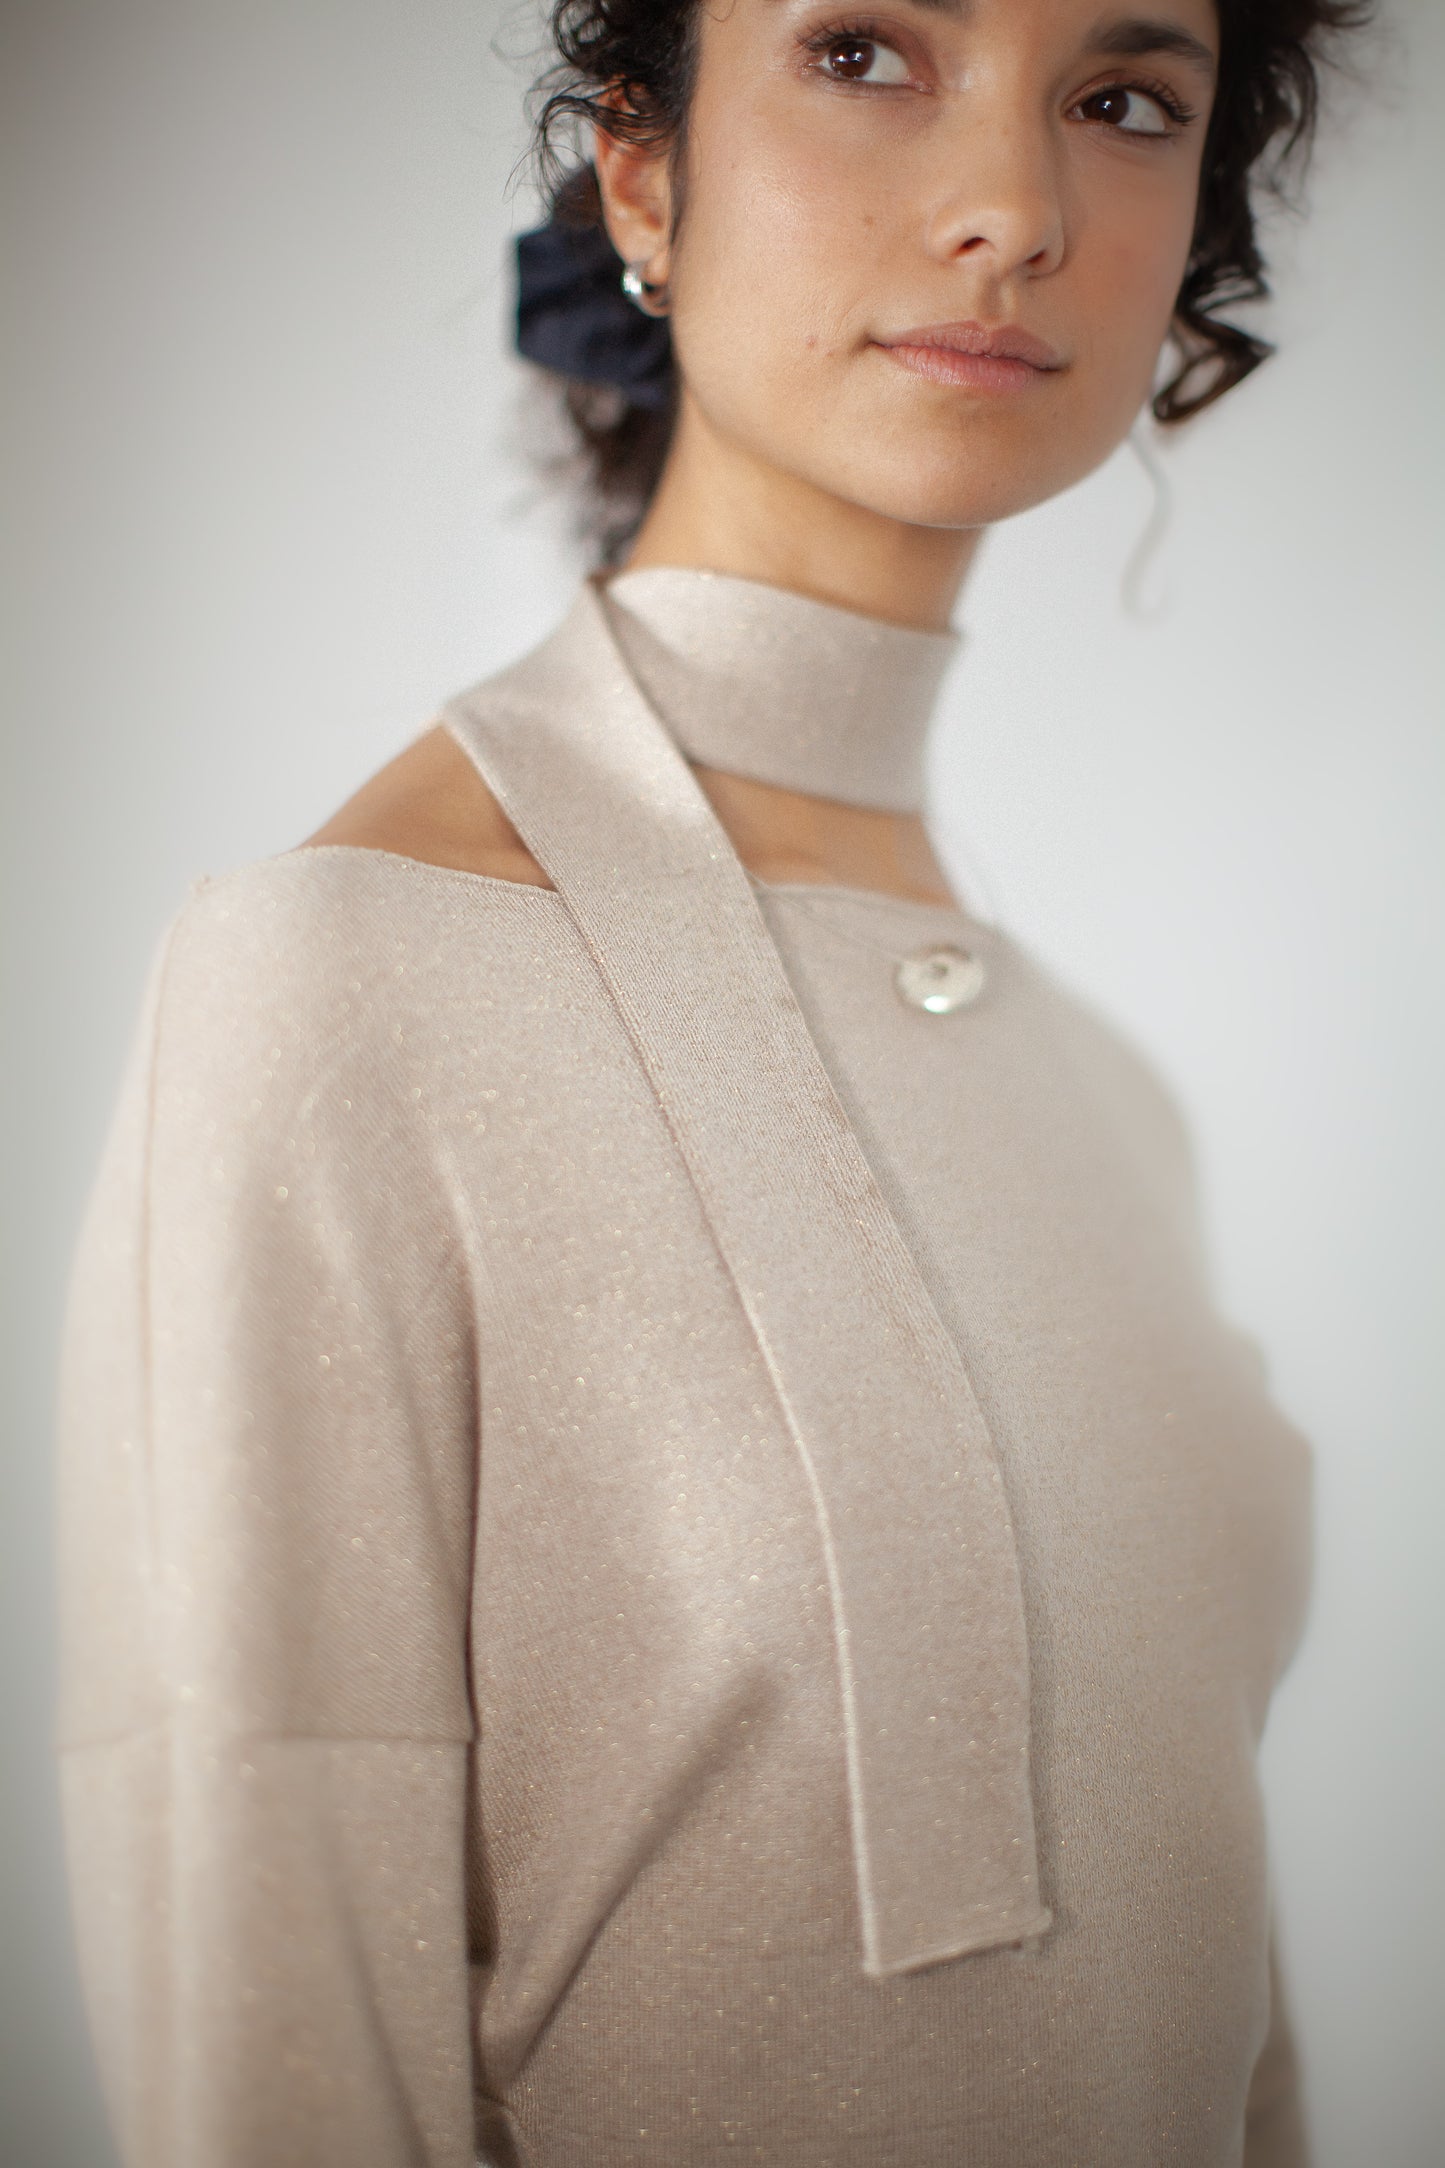 "ARAH Sweater: Luxurious jersey blend with a subtle shine. Classic boat neckline, optional coordinating scarf. Elevate your look with this chic, versatile piece."